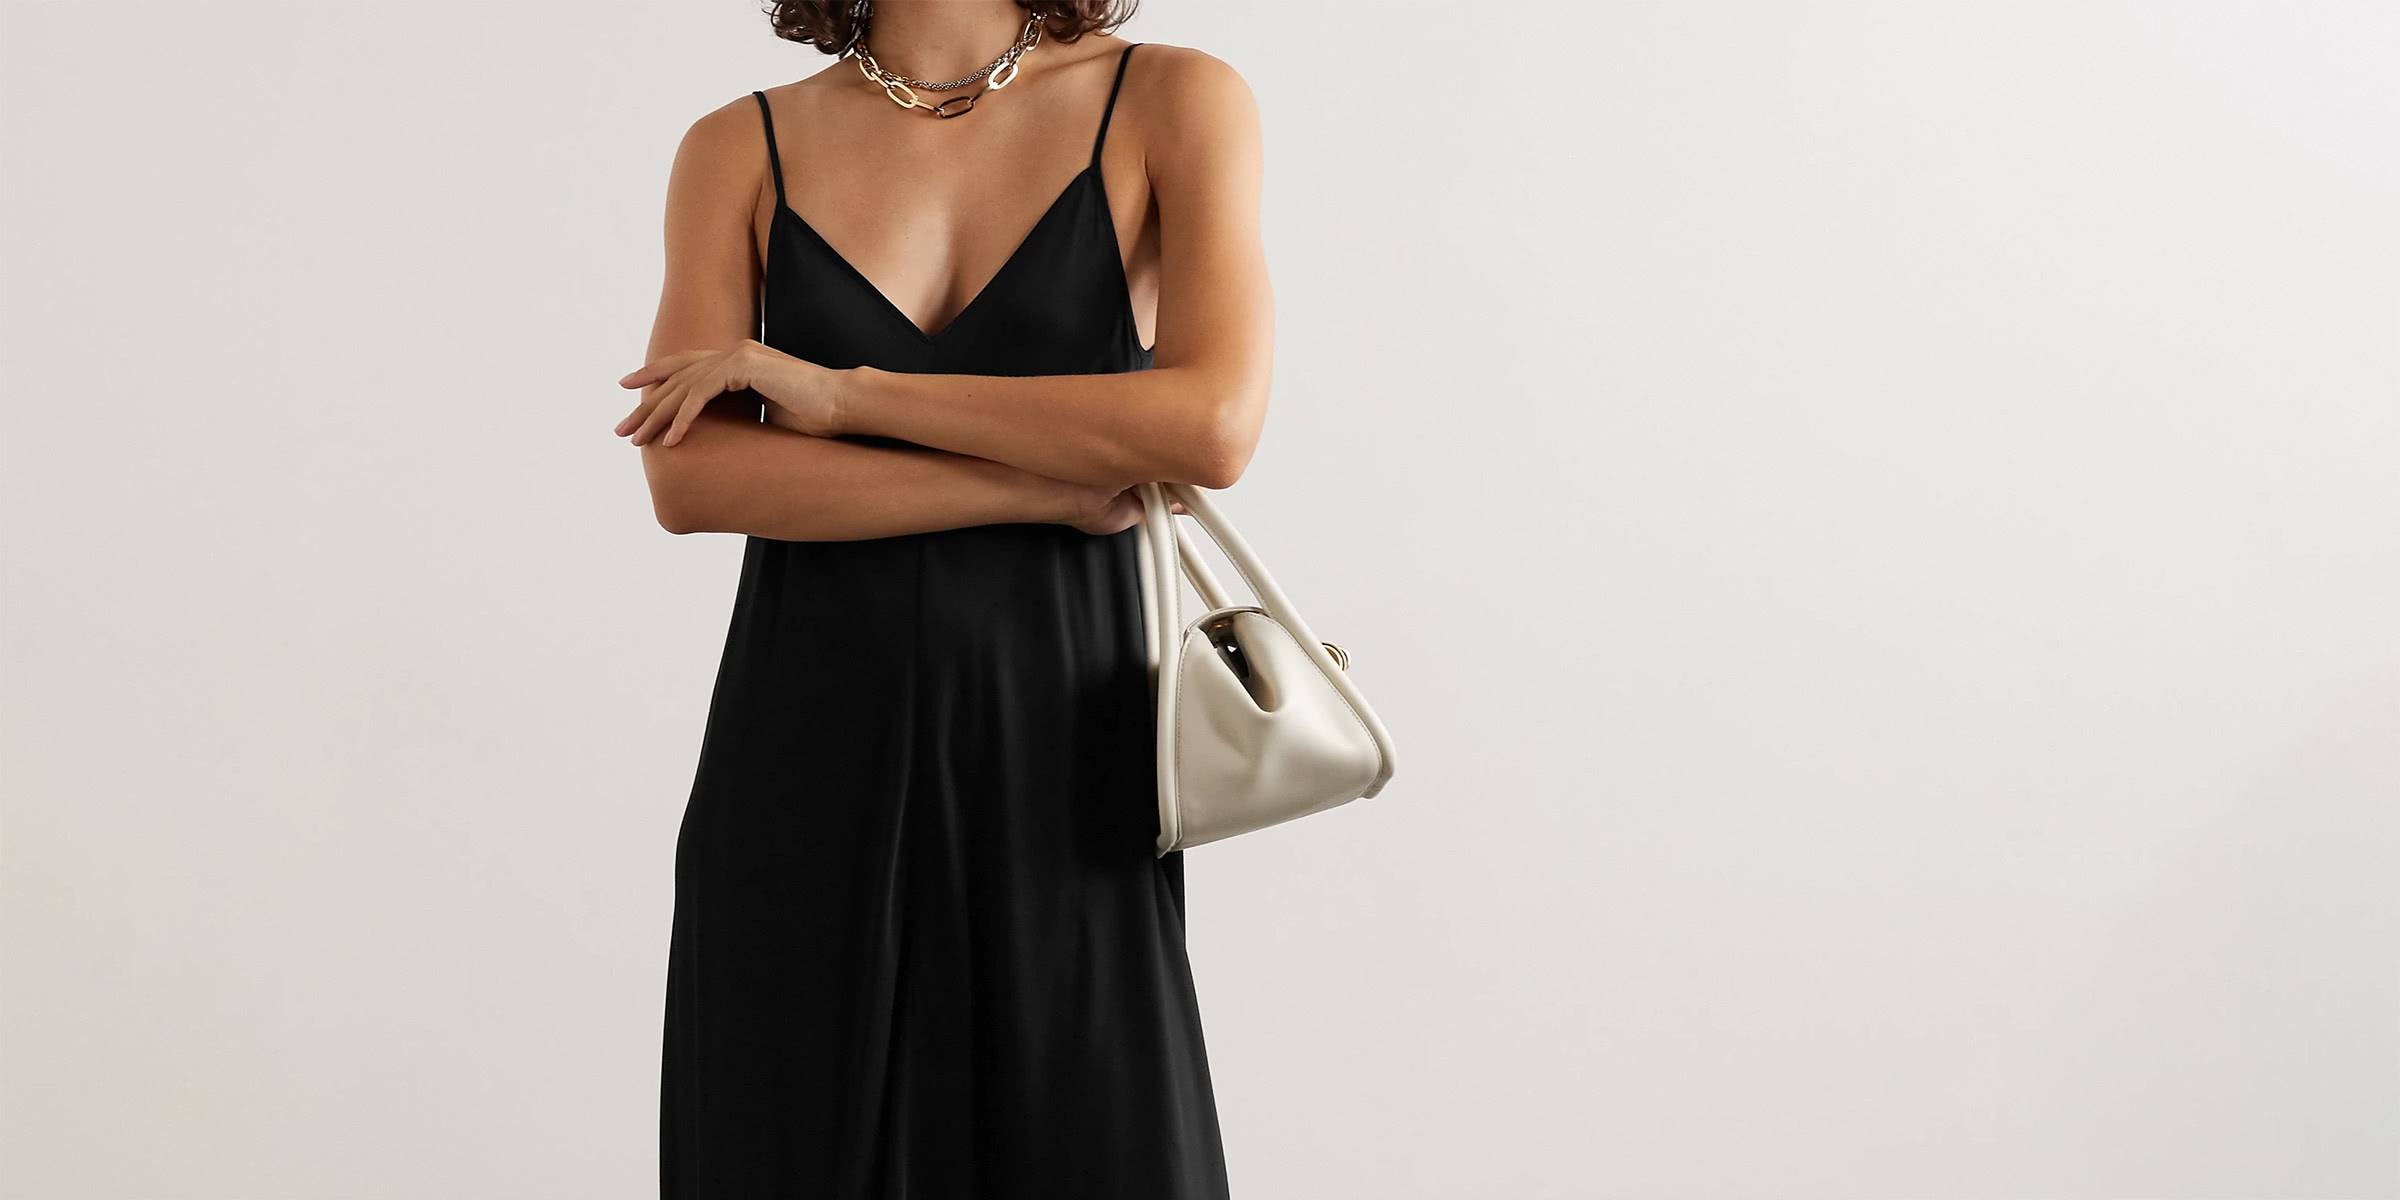 25 Best Little Black Dresses: LBD Styles For Every Occasion